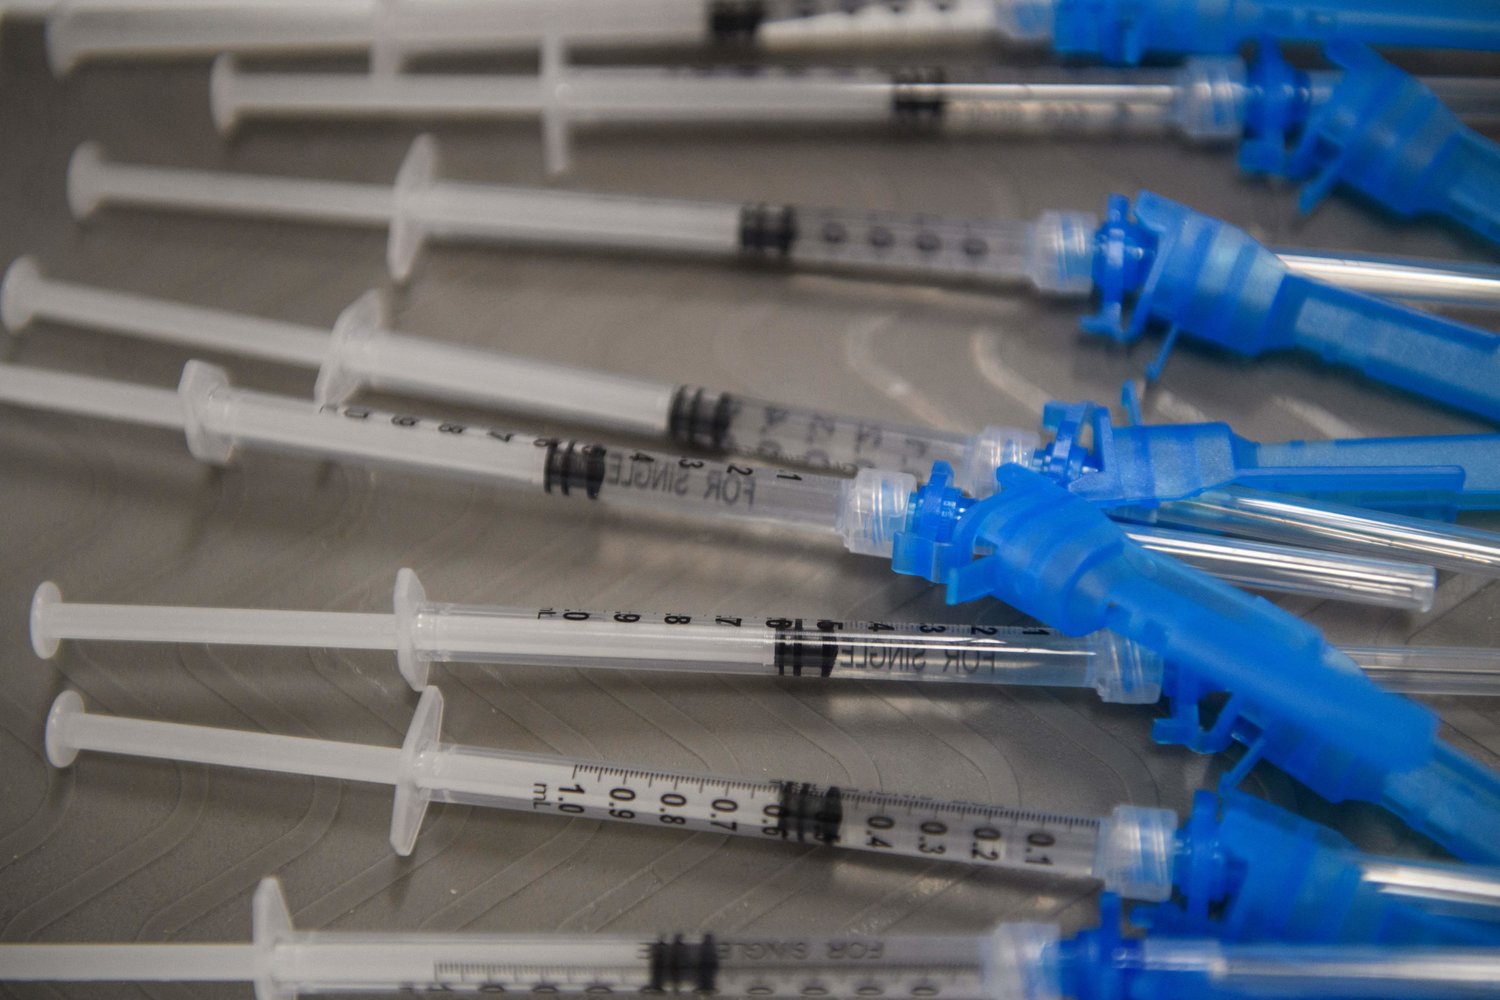 Syringes with doses of the Johnson & Johnson COVID-19 vaccine. (Patrick T. Fallon/AFP via Getty Images/TNS)